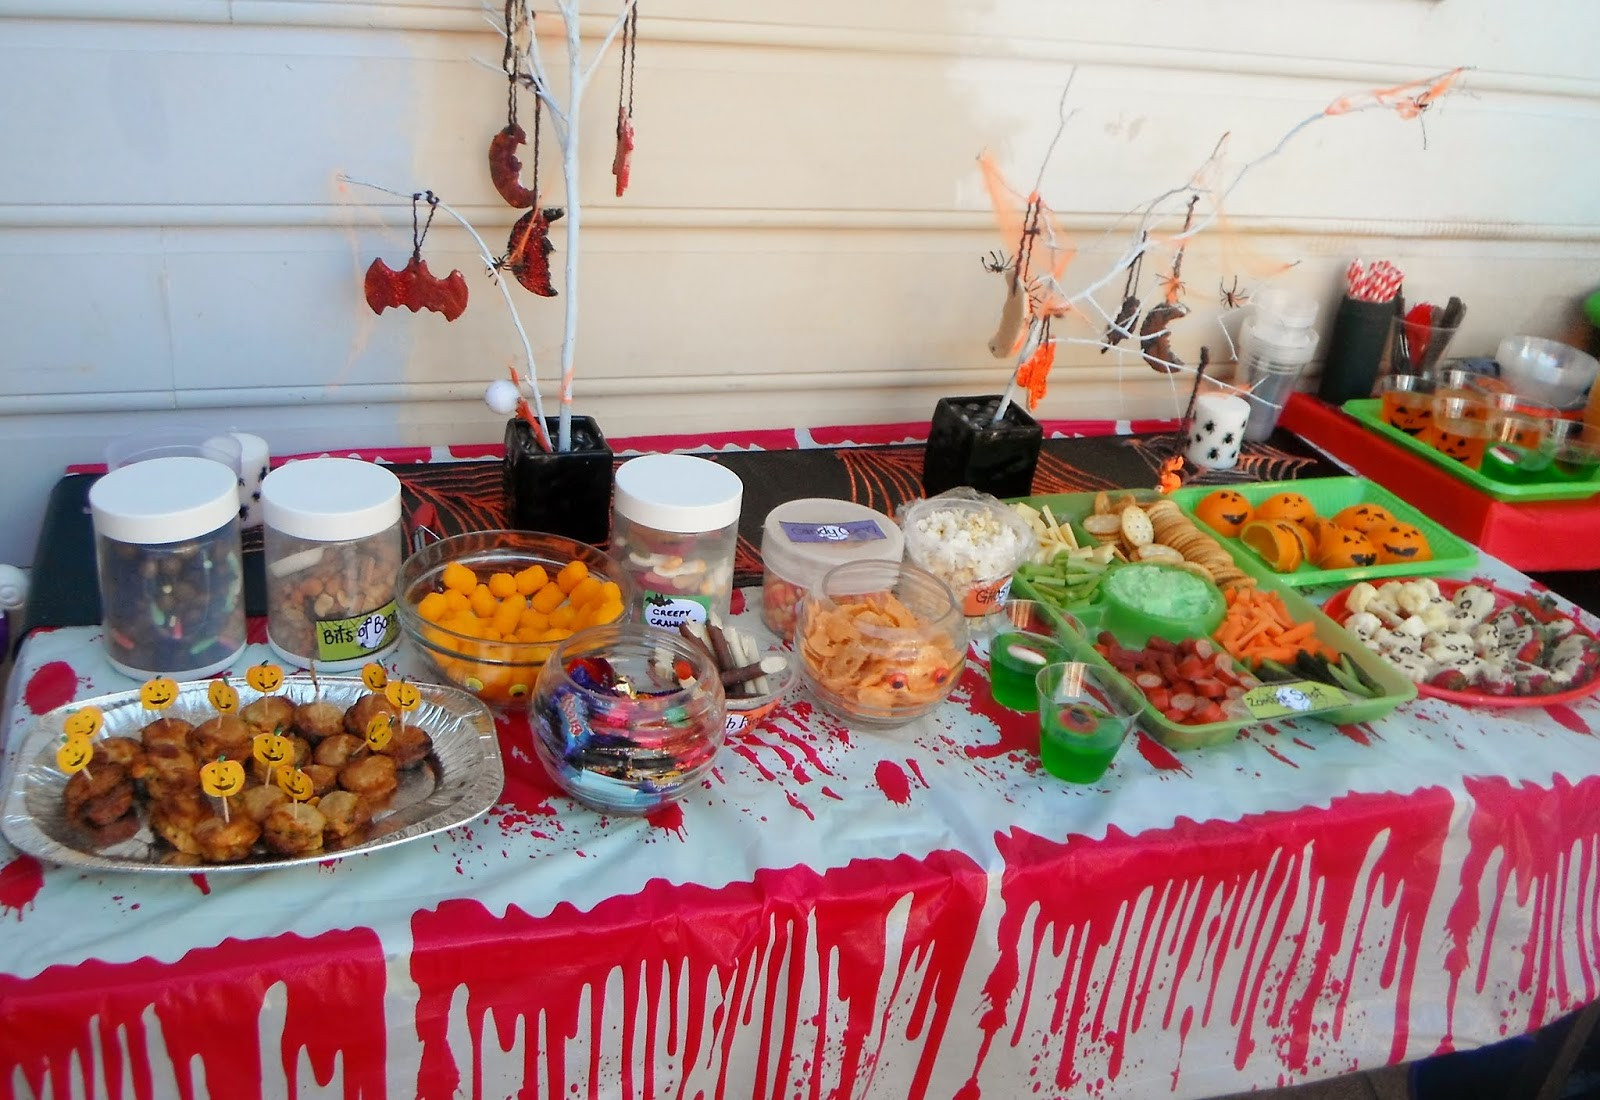 Halloween Bday Party Ideas
 Adventures at home with Mum Halloween Party Food